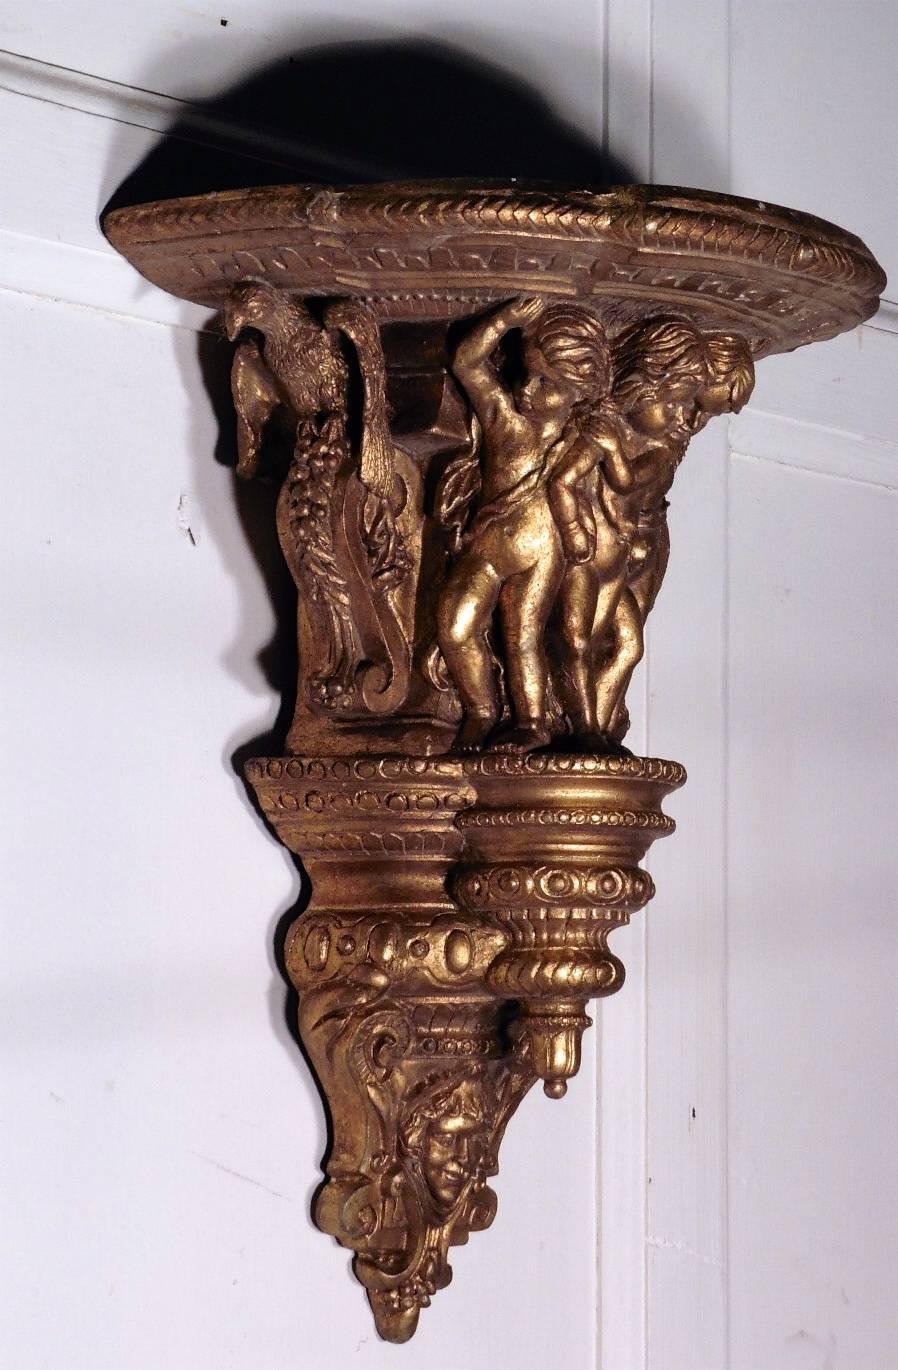 Rococo Revival 19th Century Carved Wood Gilt Wall Bracket, Putti, Eagles